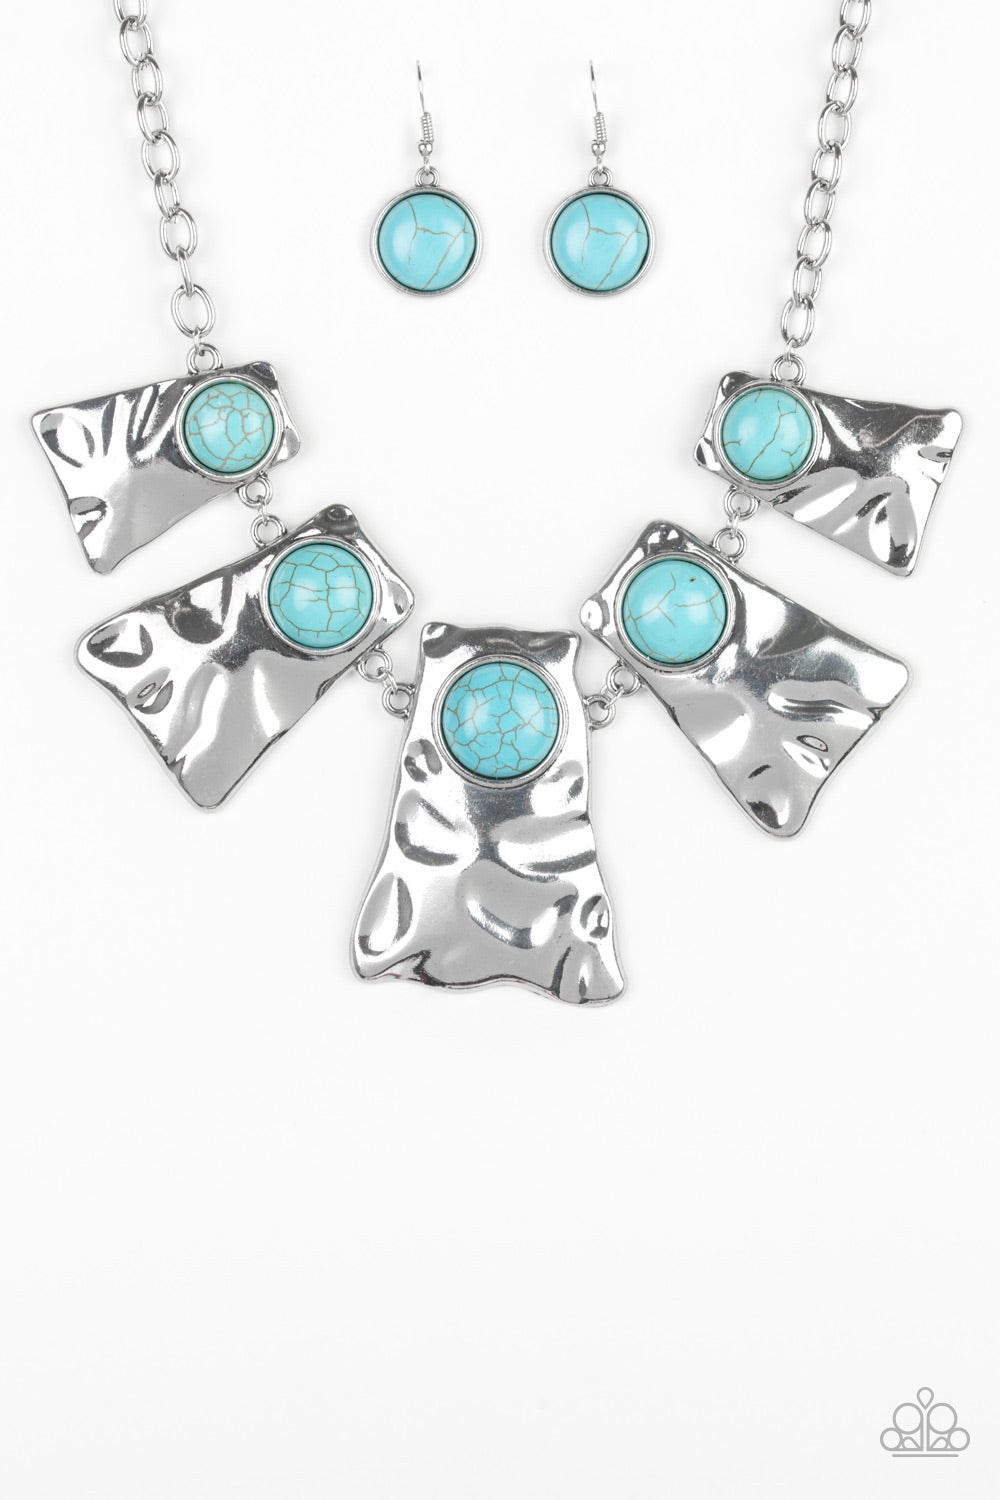 Cougar - Blue Turquoise Necklace - Paparazzi Accessories